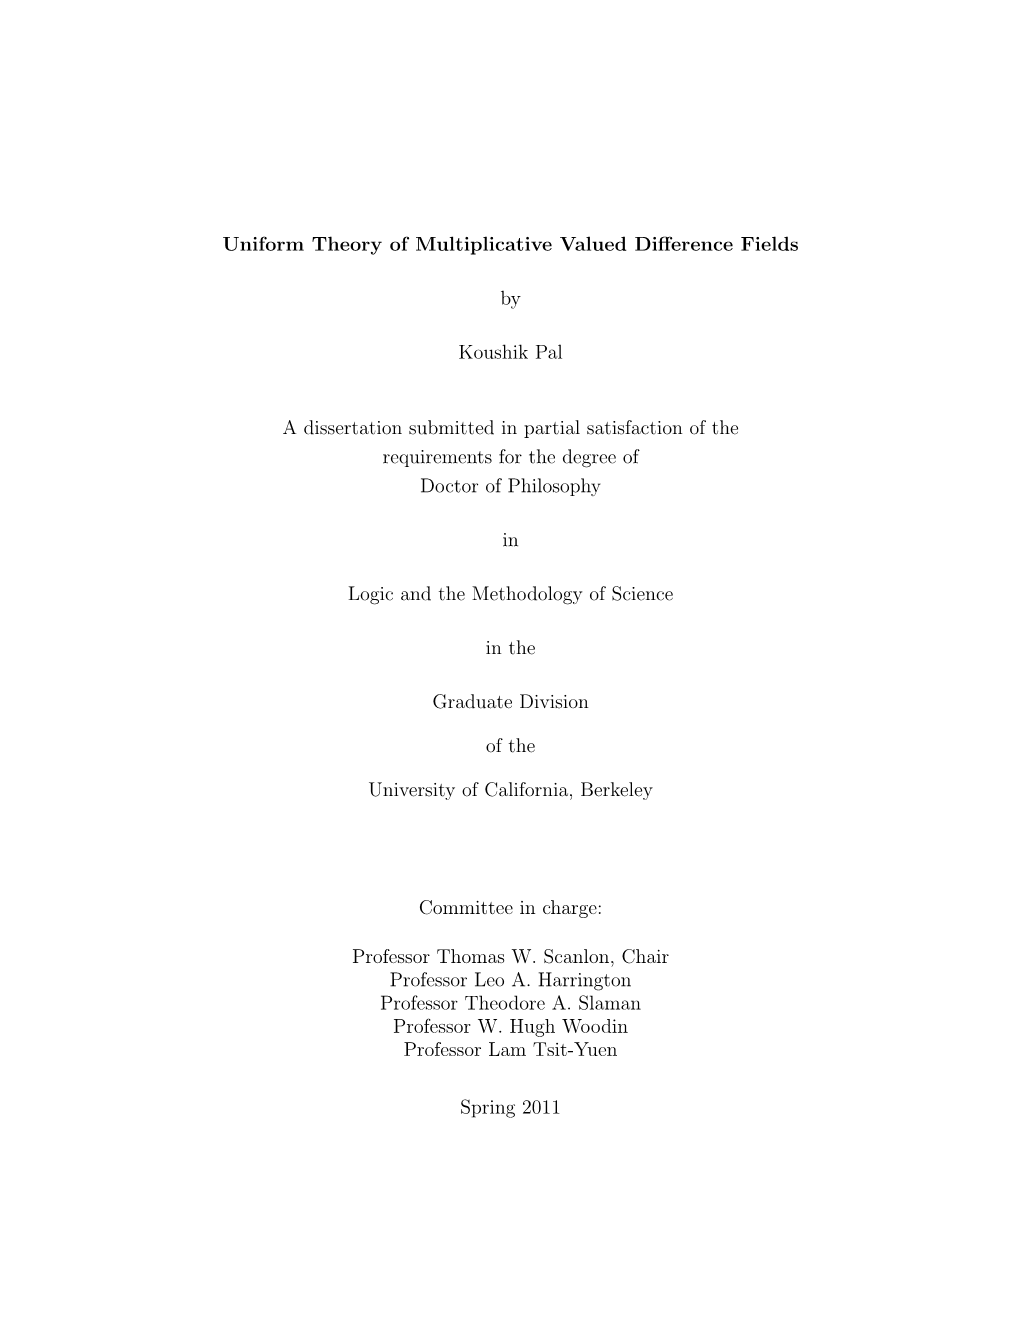 Uniform Theory of Multiplicative Valued Difference Fields By